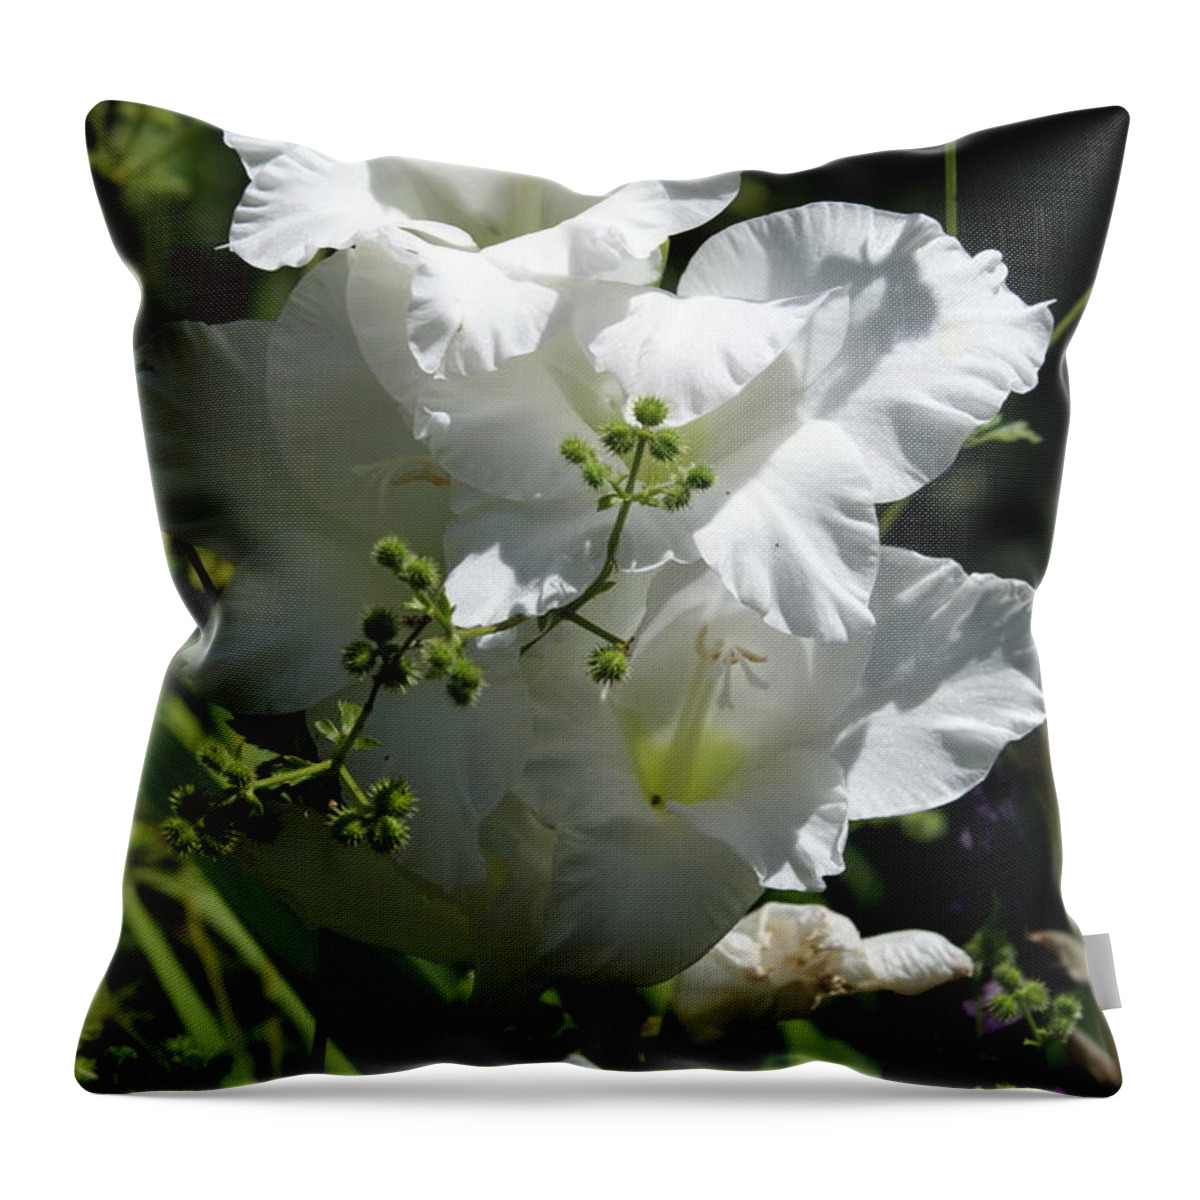  Throw Pillow featuring the photograph Gladiolus by Heather E Harman